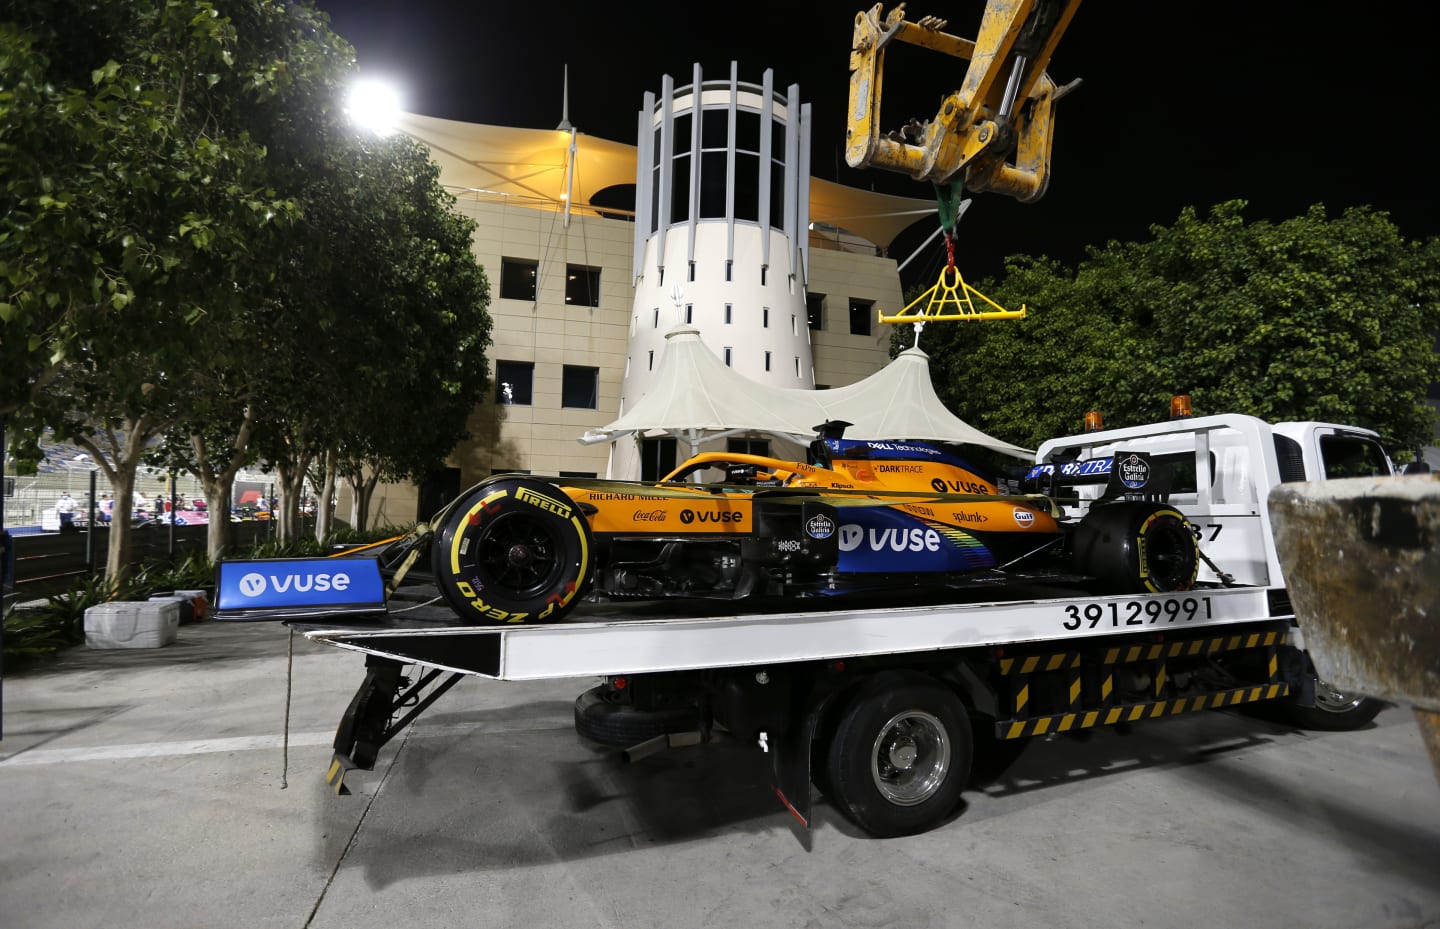 BAHRAIN, BAHRAIN - NOVEMBER 28: The car of Carlos Sainz of Spain and McLaren F1 is seen on a pickup truck after retiring during qualifying ahead of the F1 Grand Prix of Bahrain at Bahrain International Circuit on November 28, 2020 in Bahrain, Bahrain. (Photo by Hamad Mohammed - Pool/Getty Images)